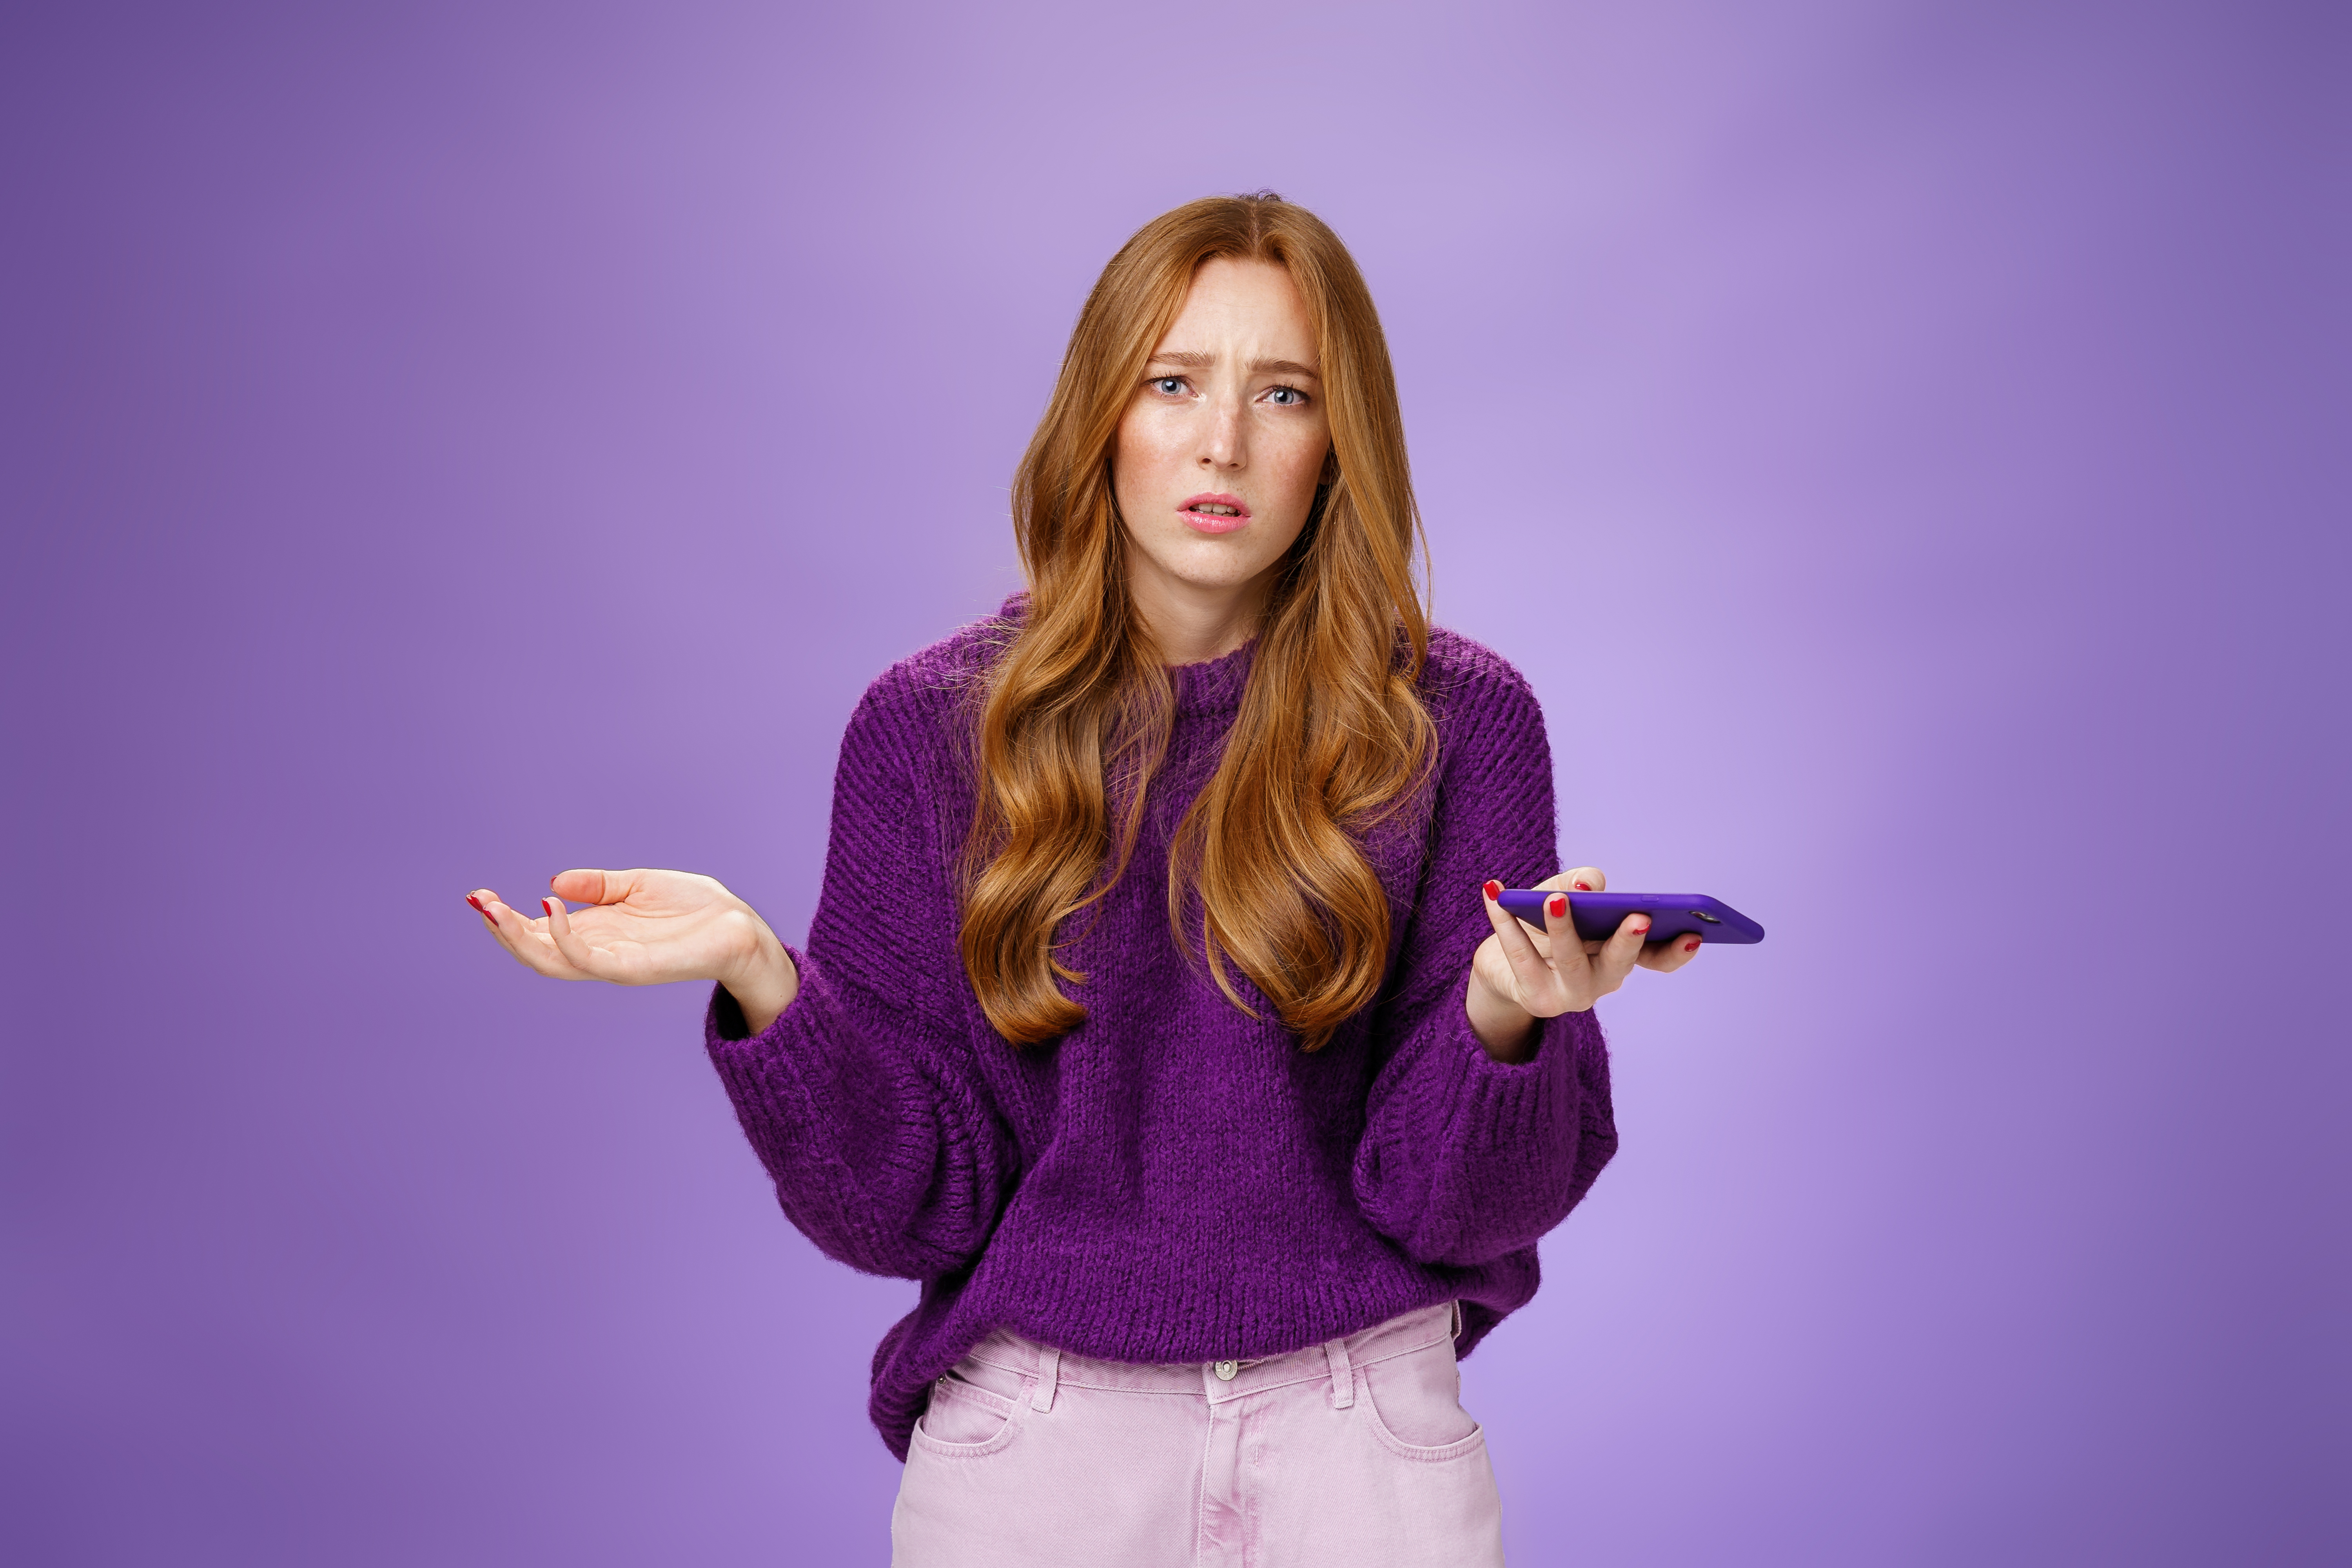 Clueless and sad cute redhead woman spread hands sideways frowning disturbed and upset holding smartphone being questioned and clueless why mobile phone not working, posing over purple wall